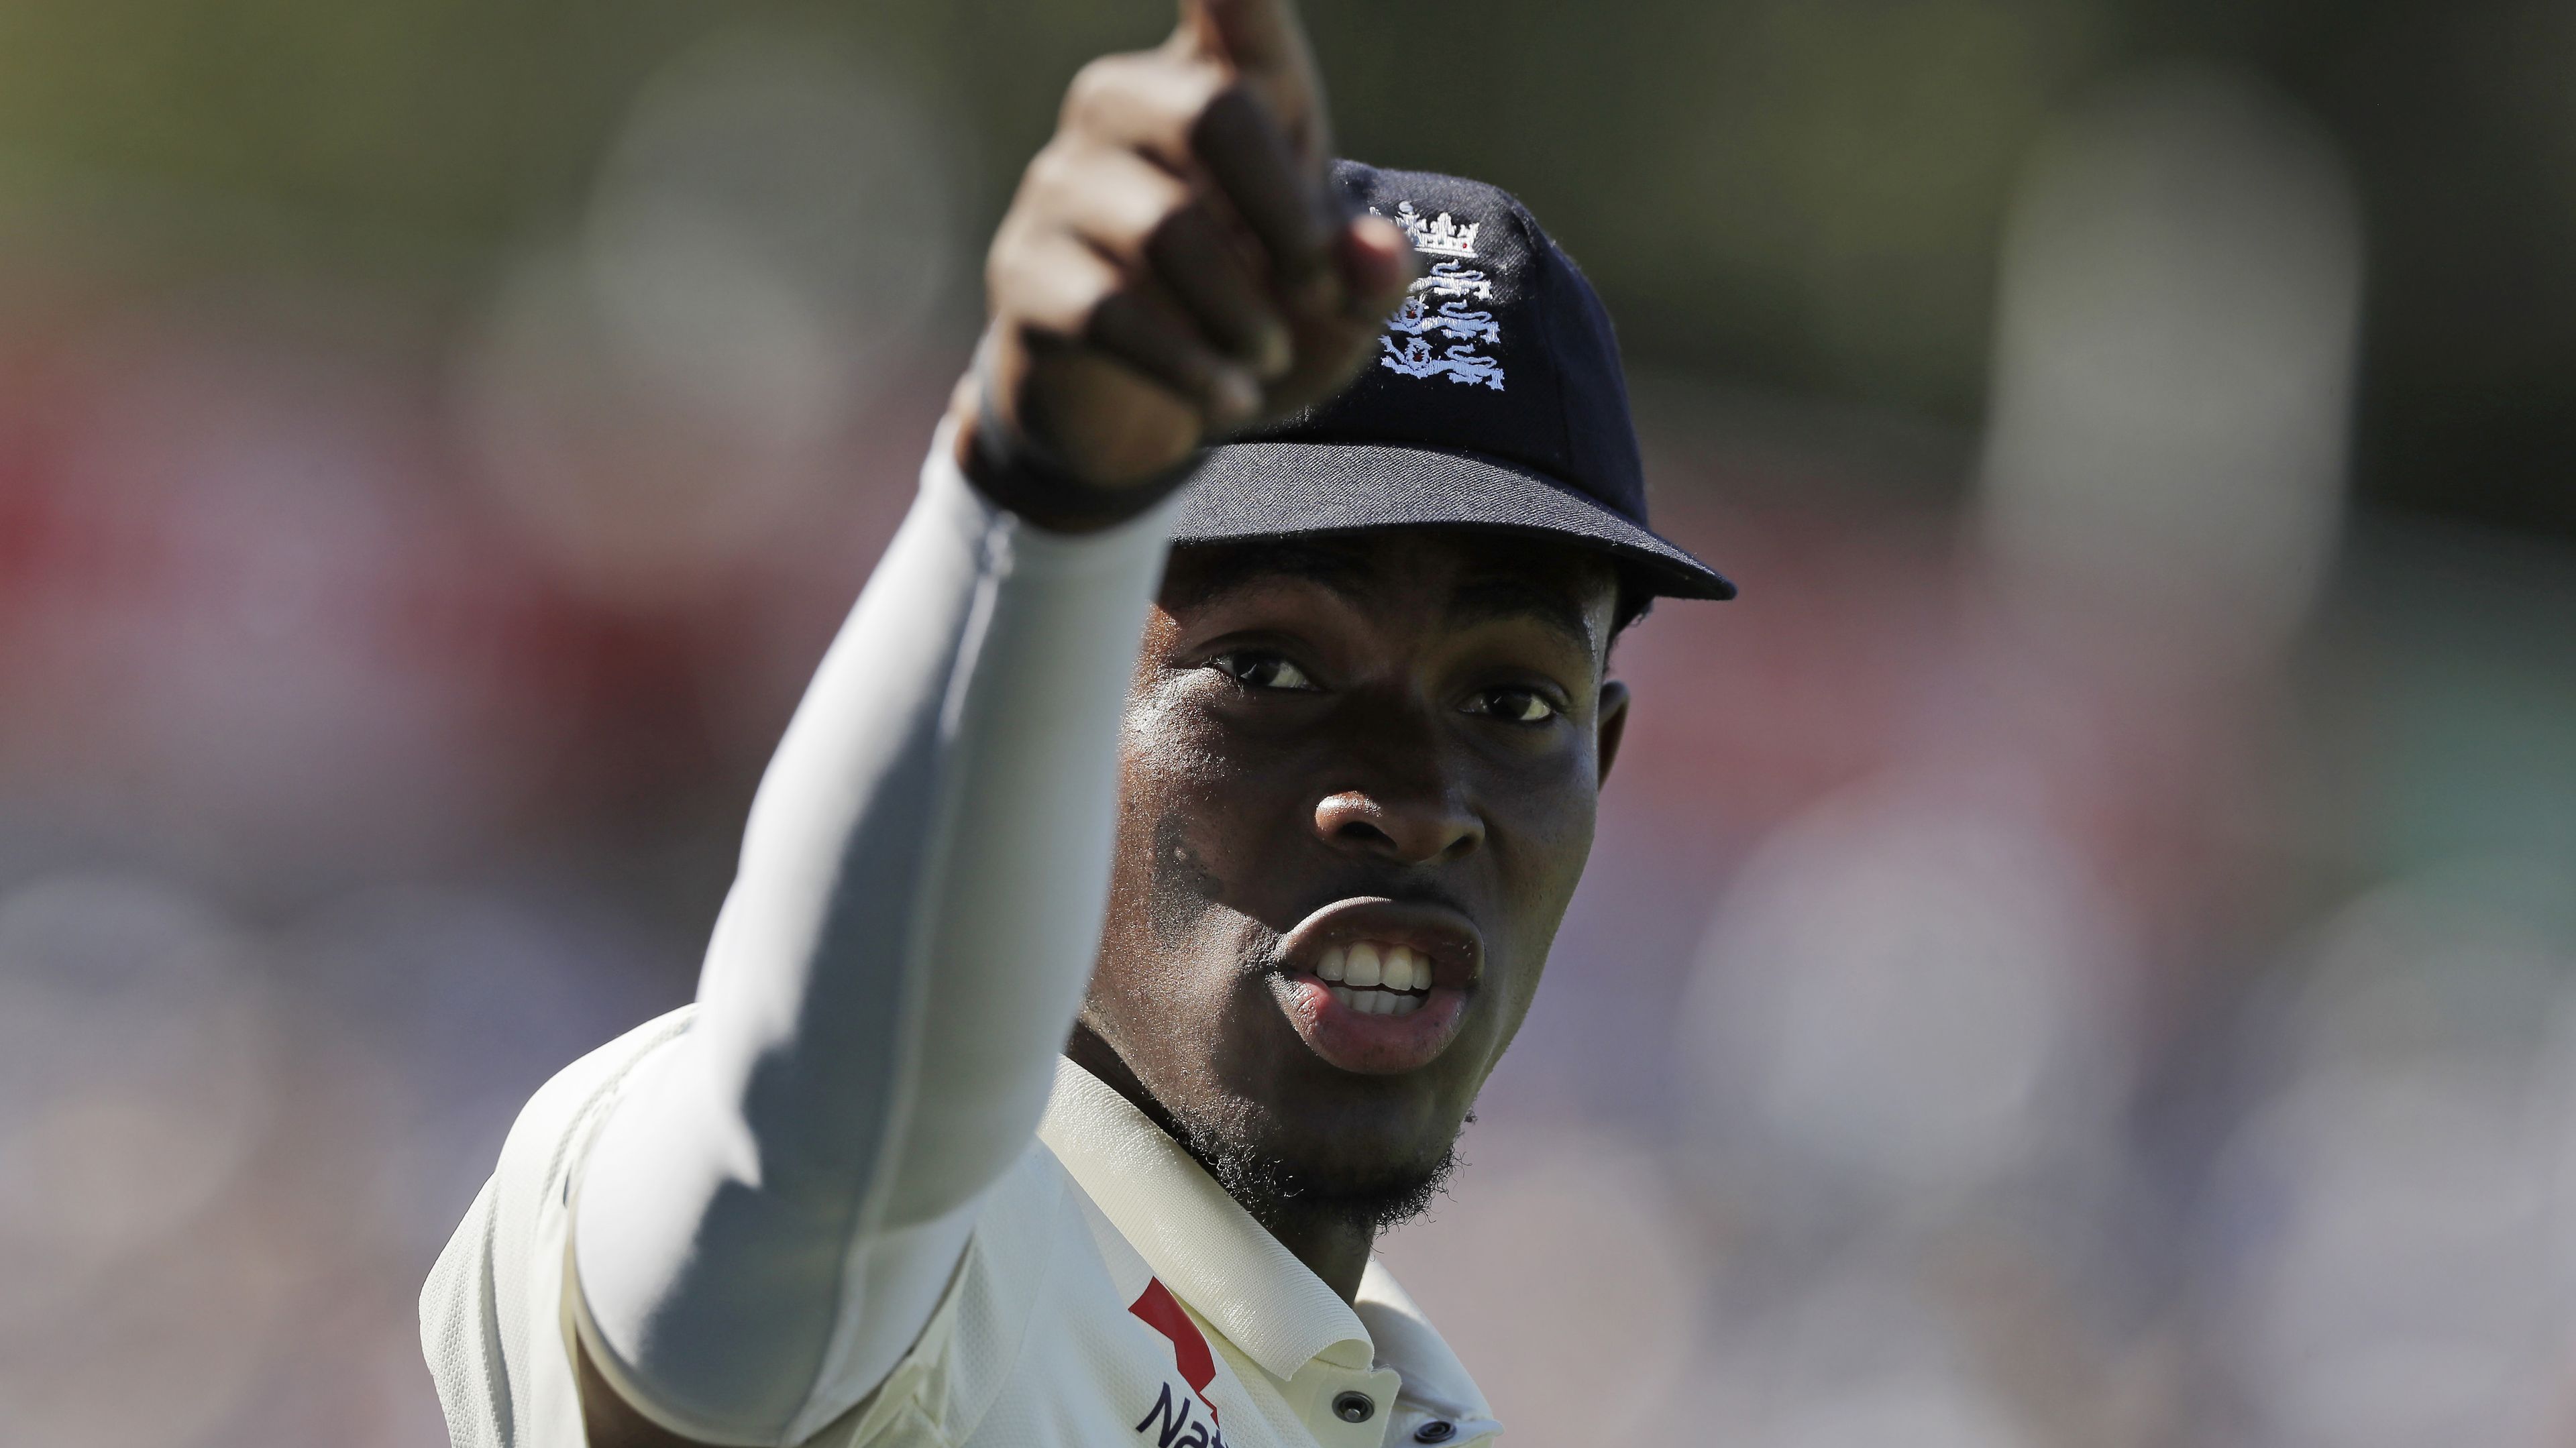 England bowler Jofra Archer after claiming a wicket in his over during day two of the England v Australia 5th Ashes test match at The Oval on September 13th 2019 in London (Photo by Tom Jenkins)